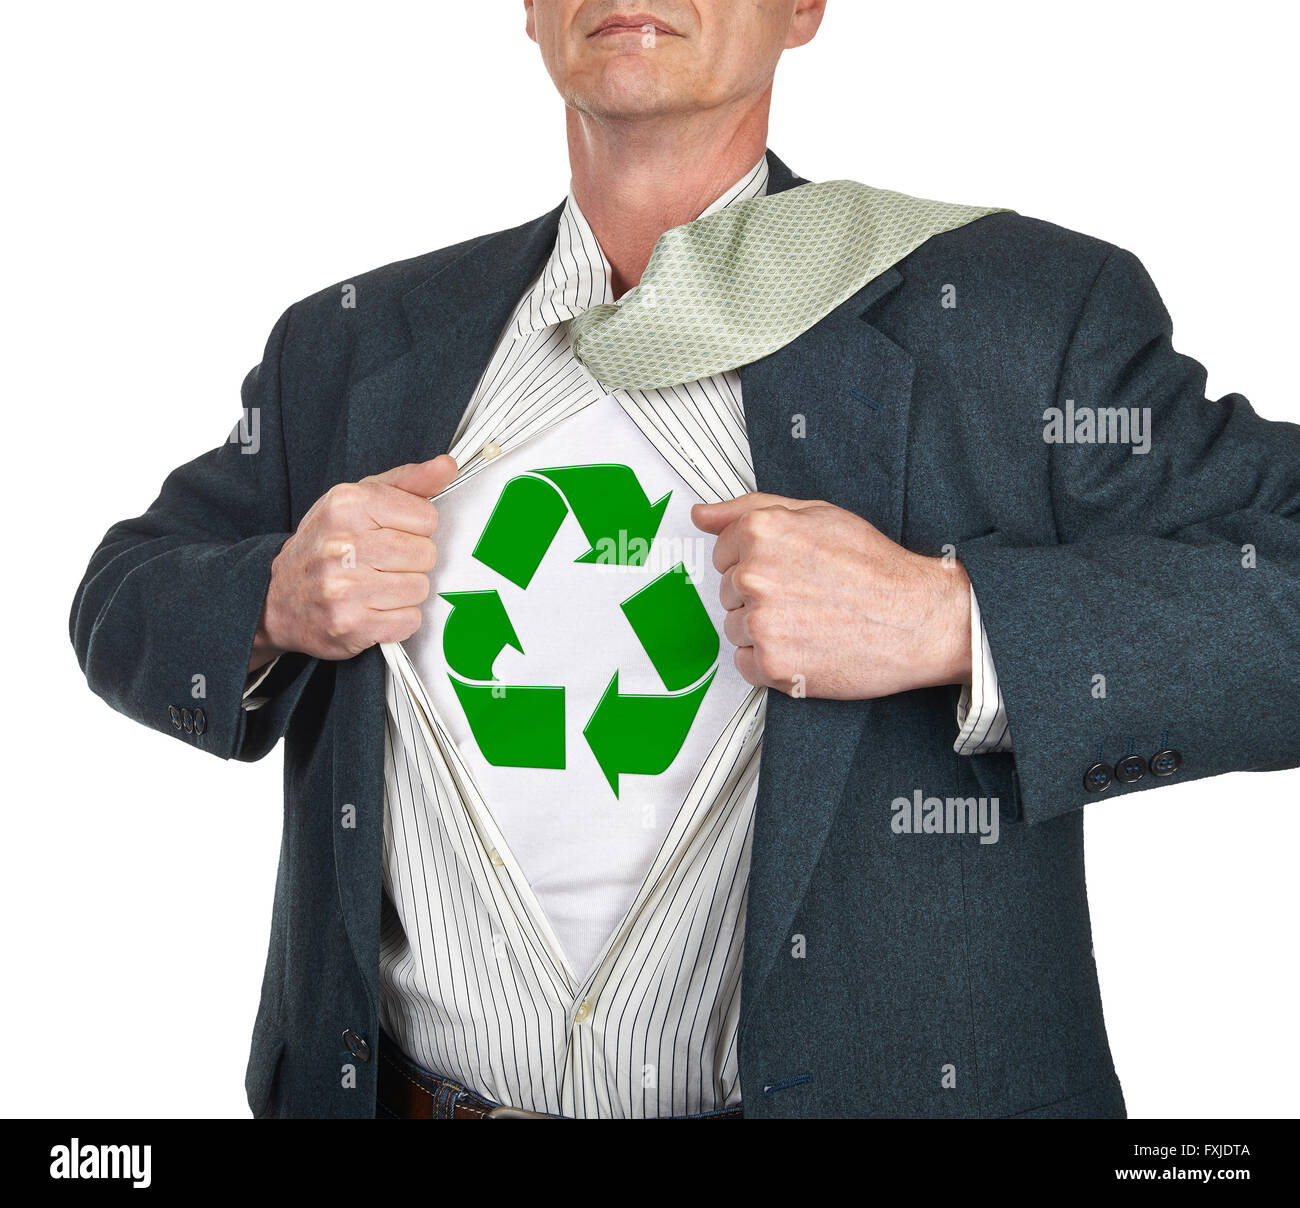 Businessman showing recycling symbol superhero suit underneath his shirt standing against white background Stock Photo